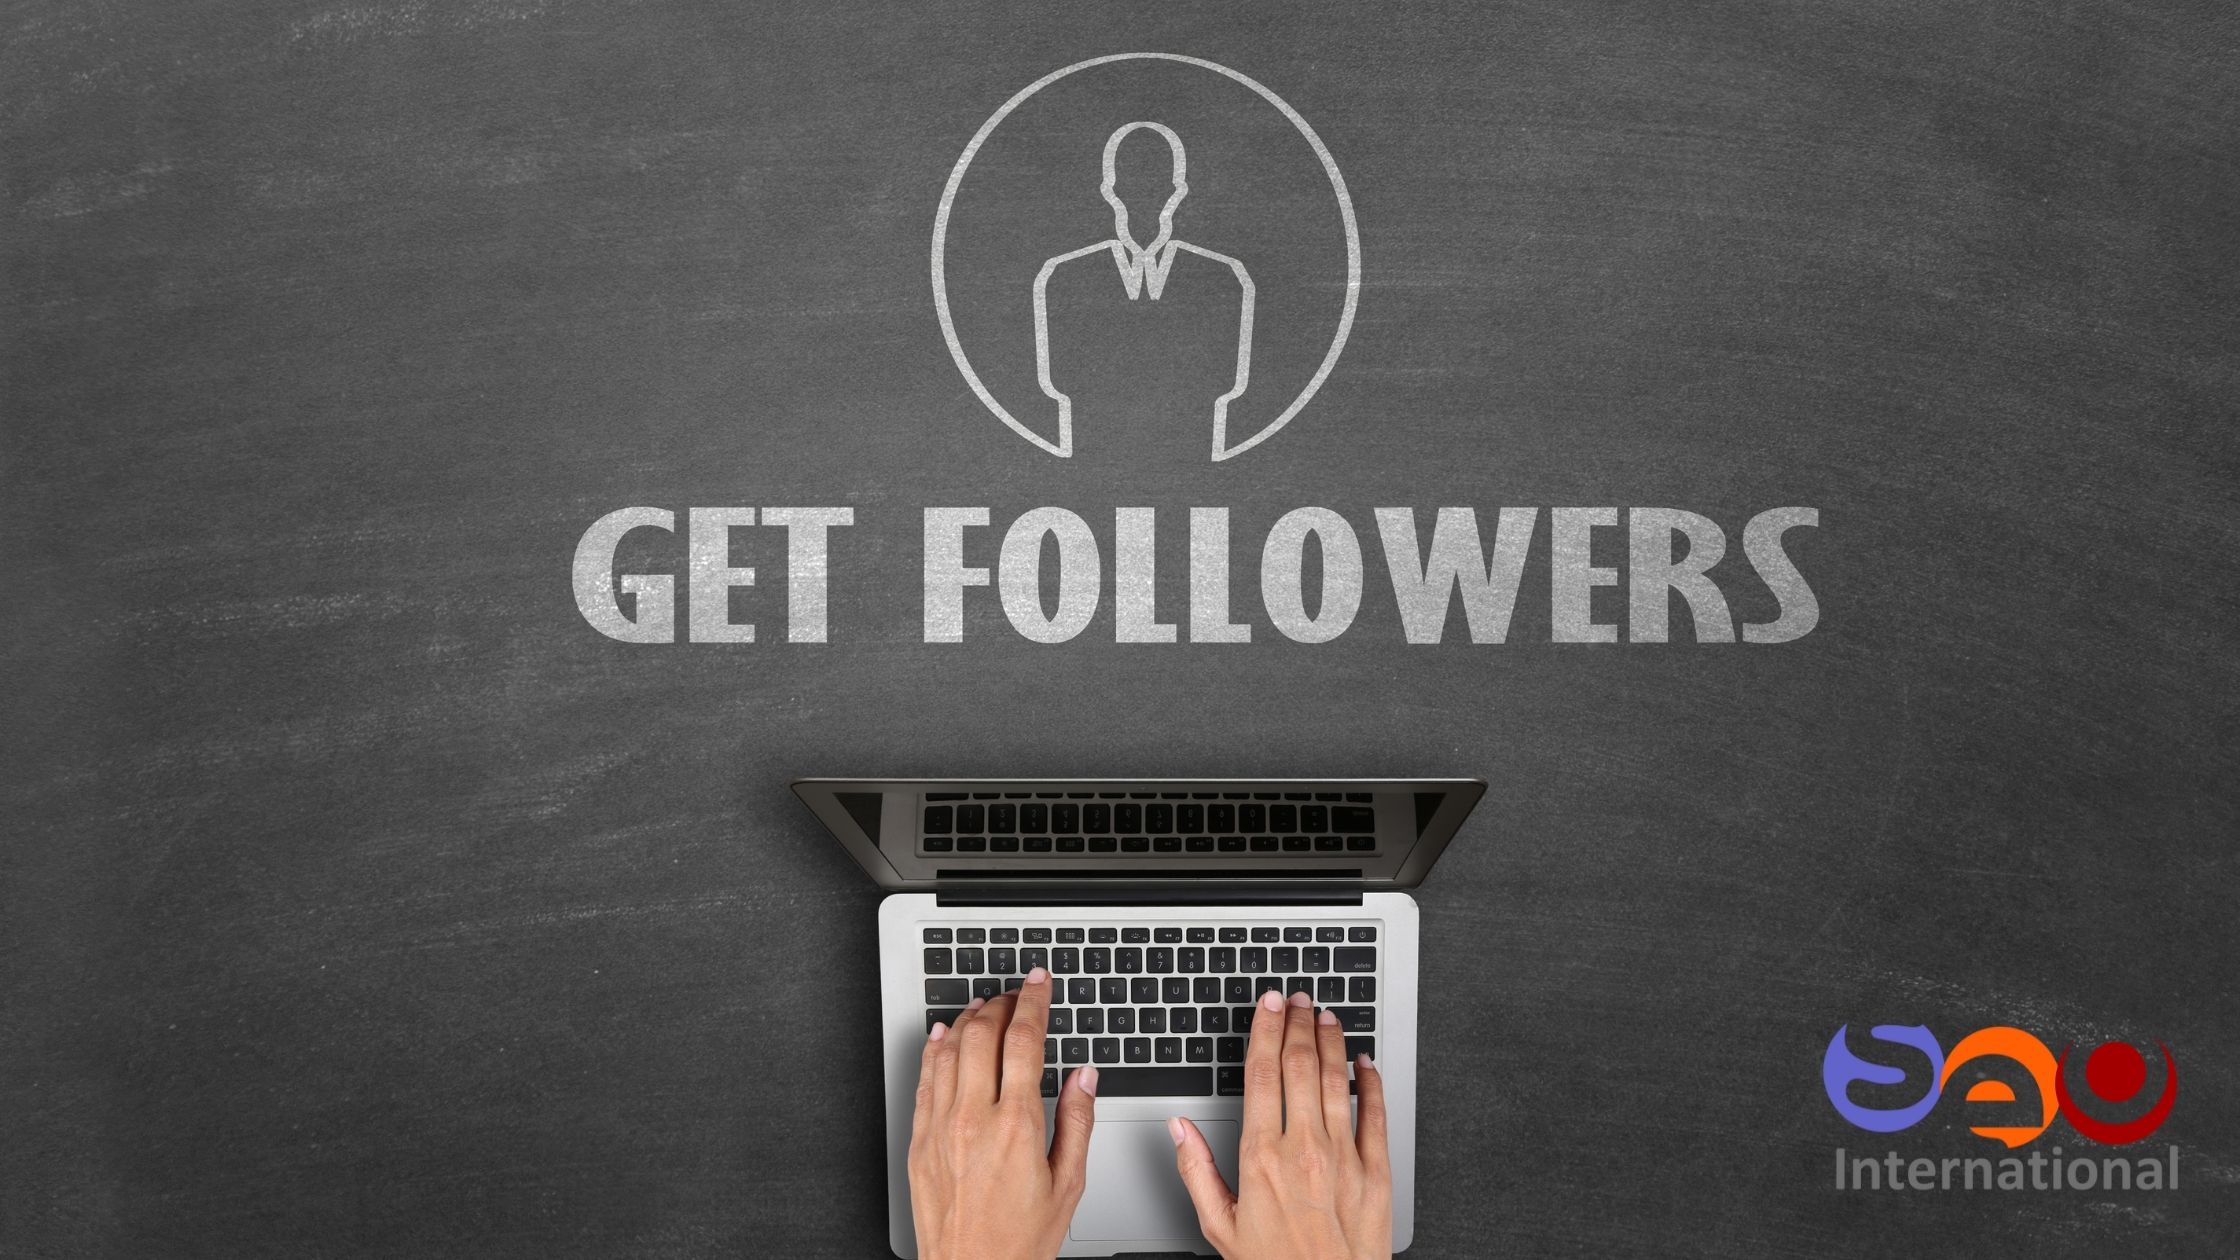 14 Valuable Tips to Increasing Your Social Media Followers and Engagement